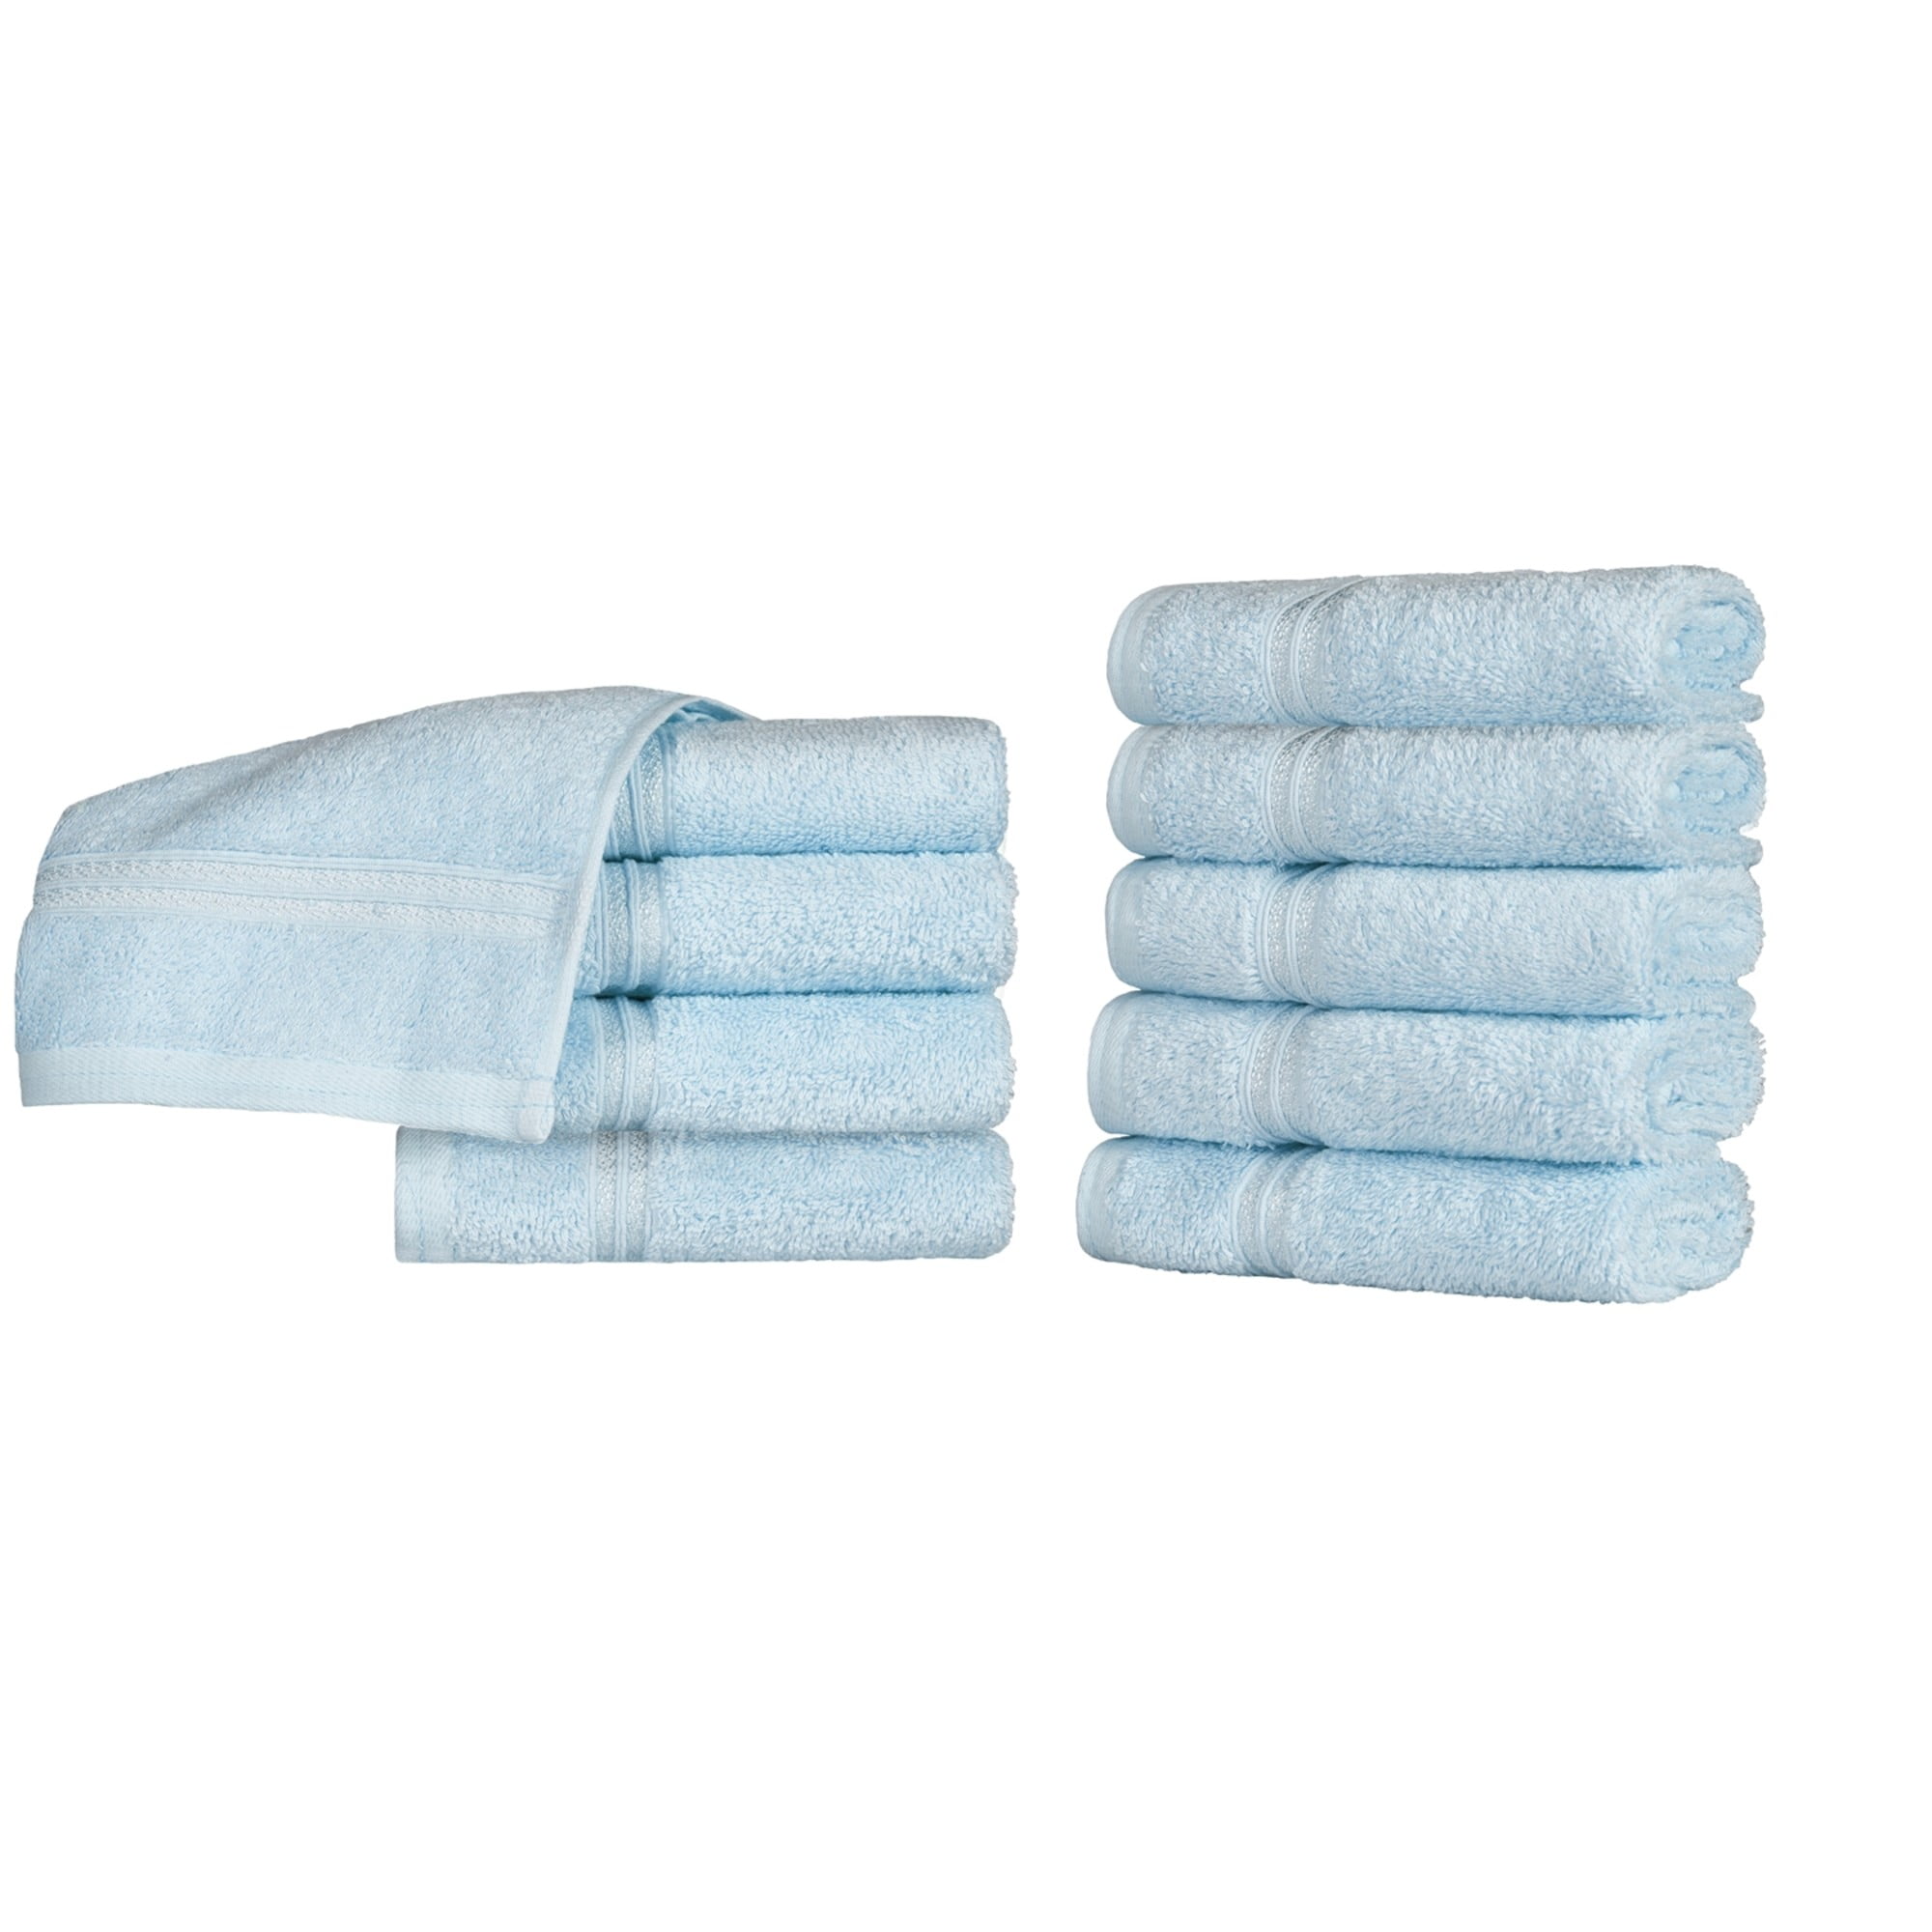 Bolingbroke Classic Ultra-Soft Absorbent 10-Piece Egyptian Cotton Face ...